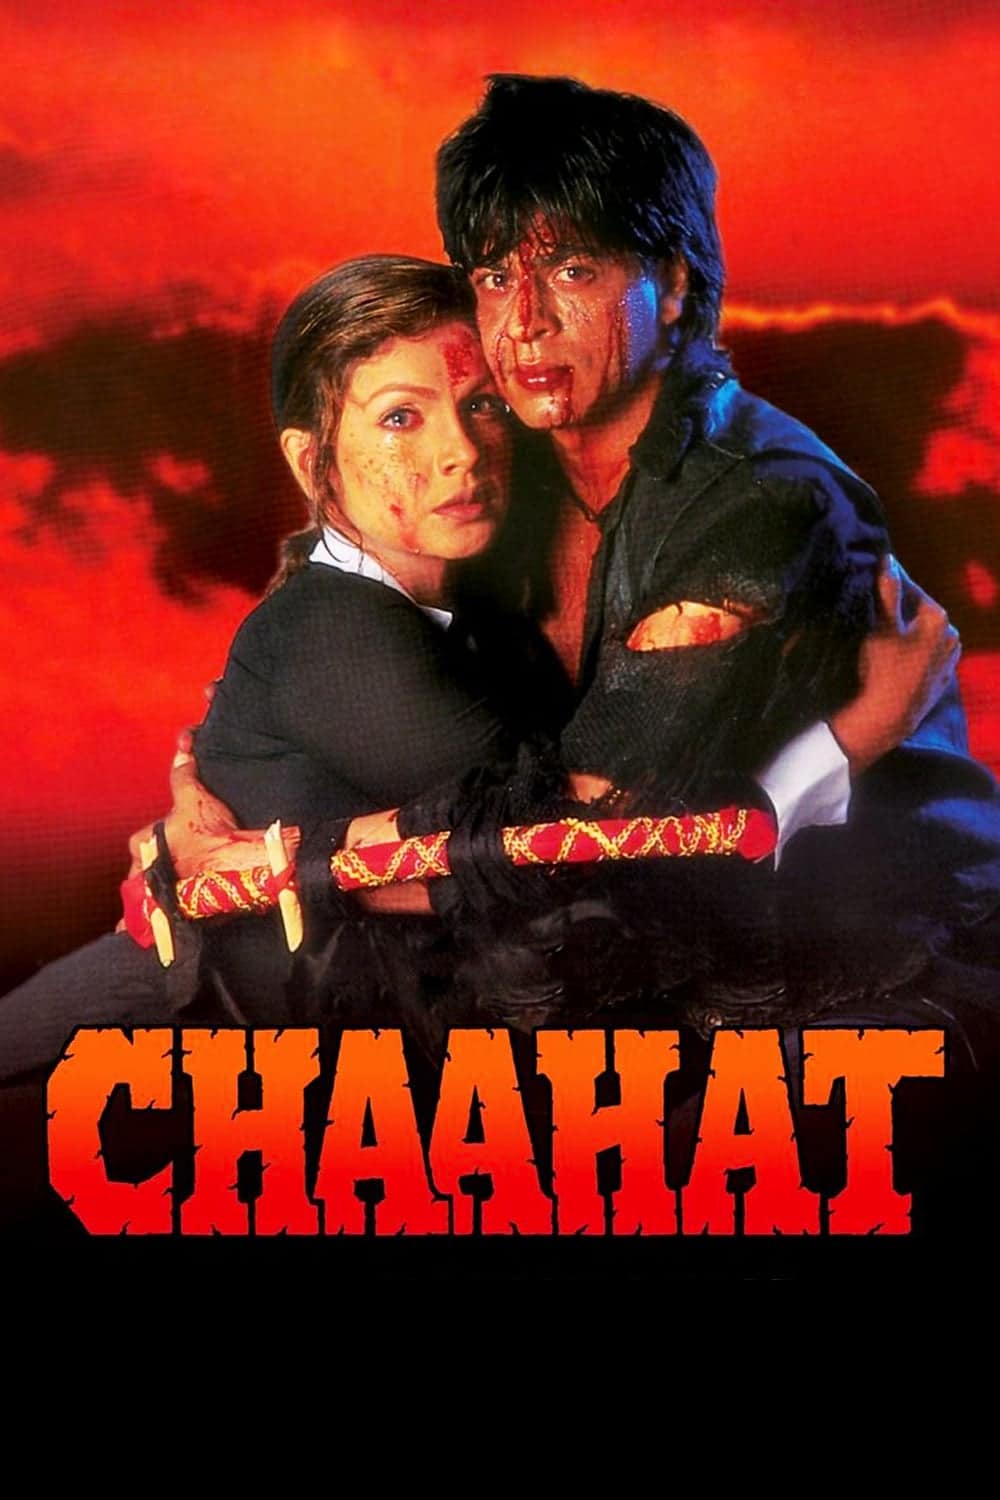 Poster for the movie "Chaahat"